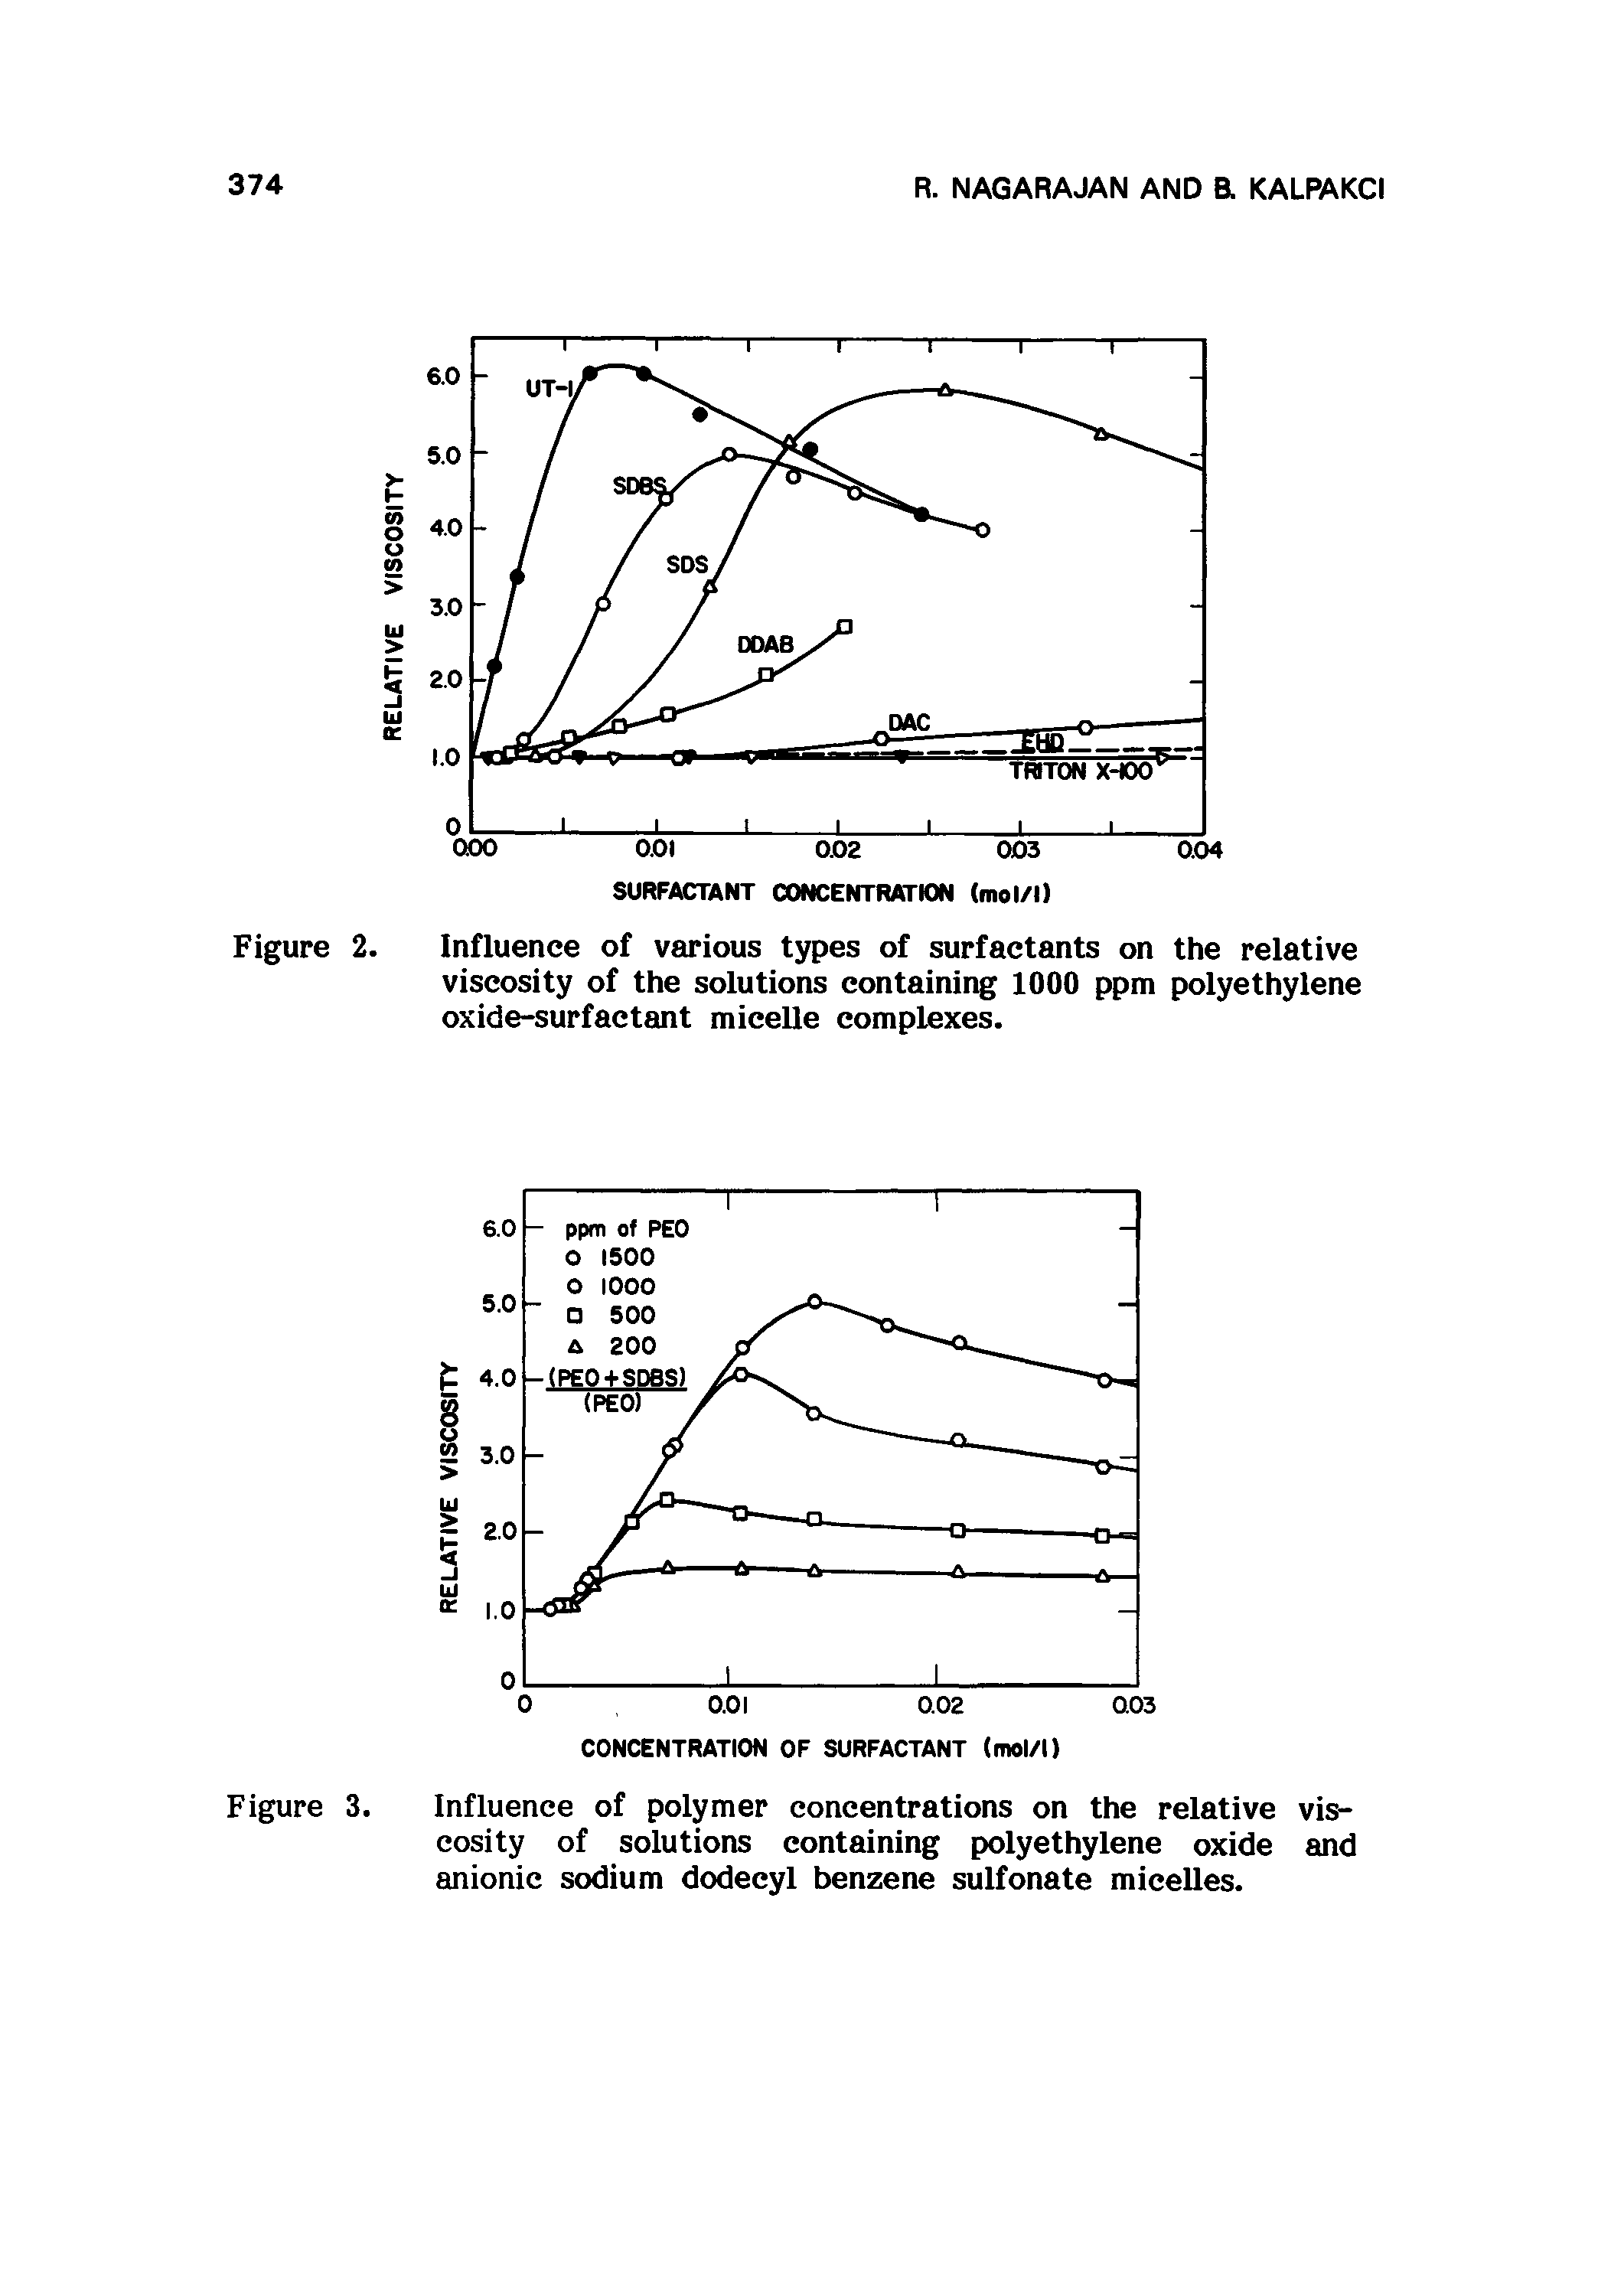 Figure 3. Influence of polymer concentrations on the relative viscosity of solutions containing polyethylene oxide and anionic sodium dodecyl benzene sulfonate micelles.